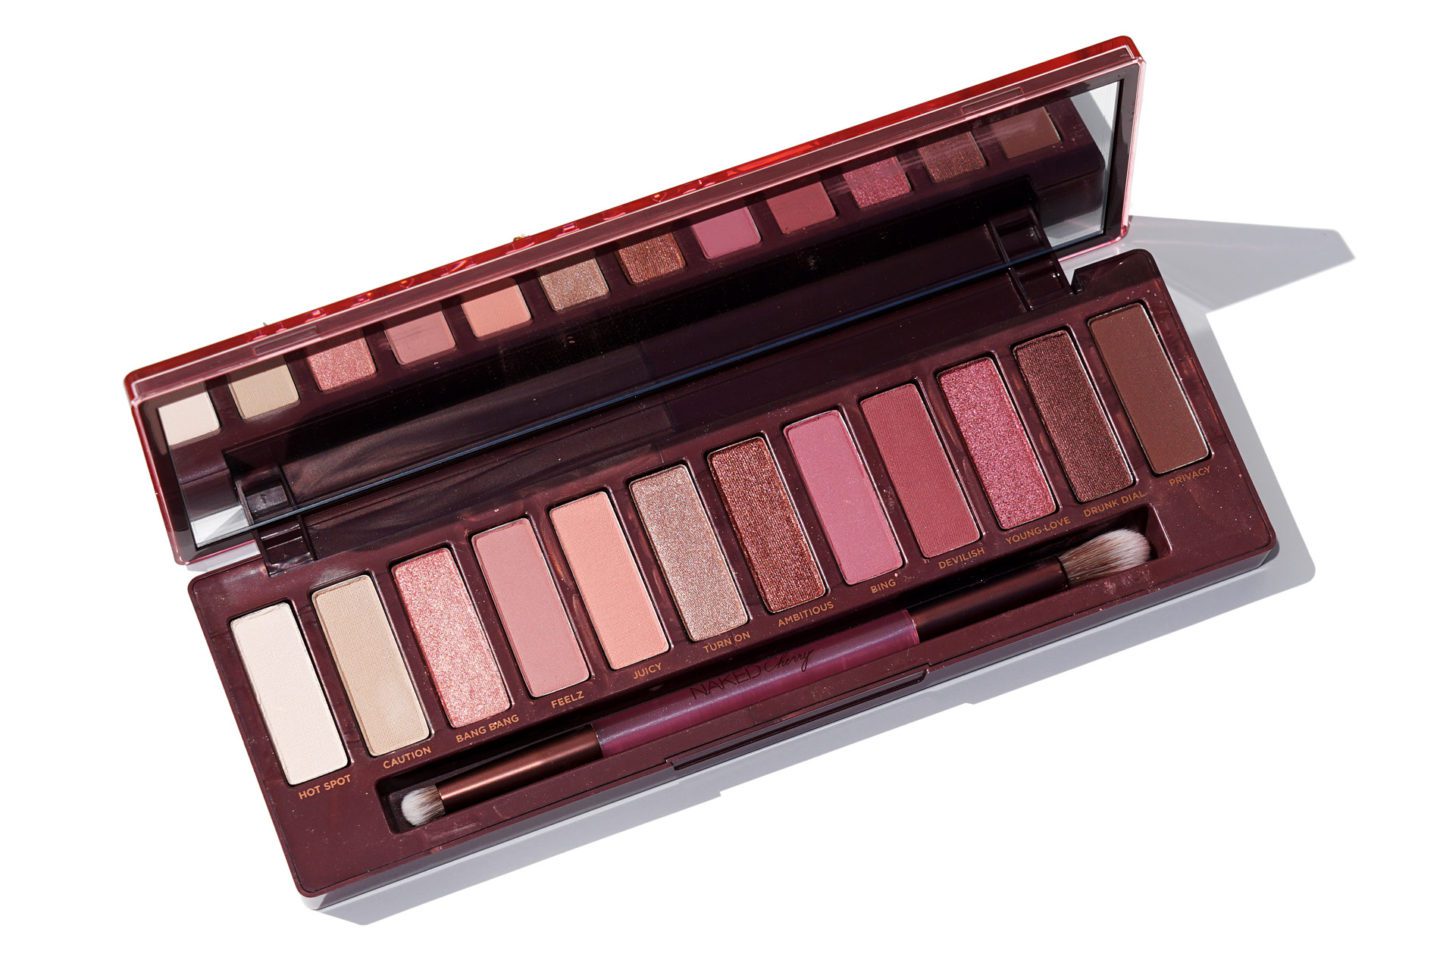 Urban Decay Archives The Beauty Look Book